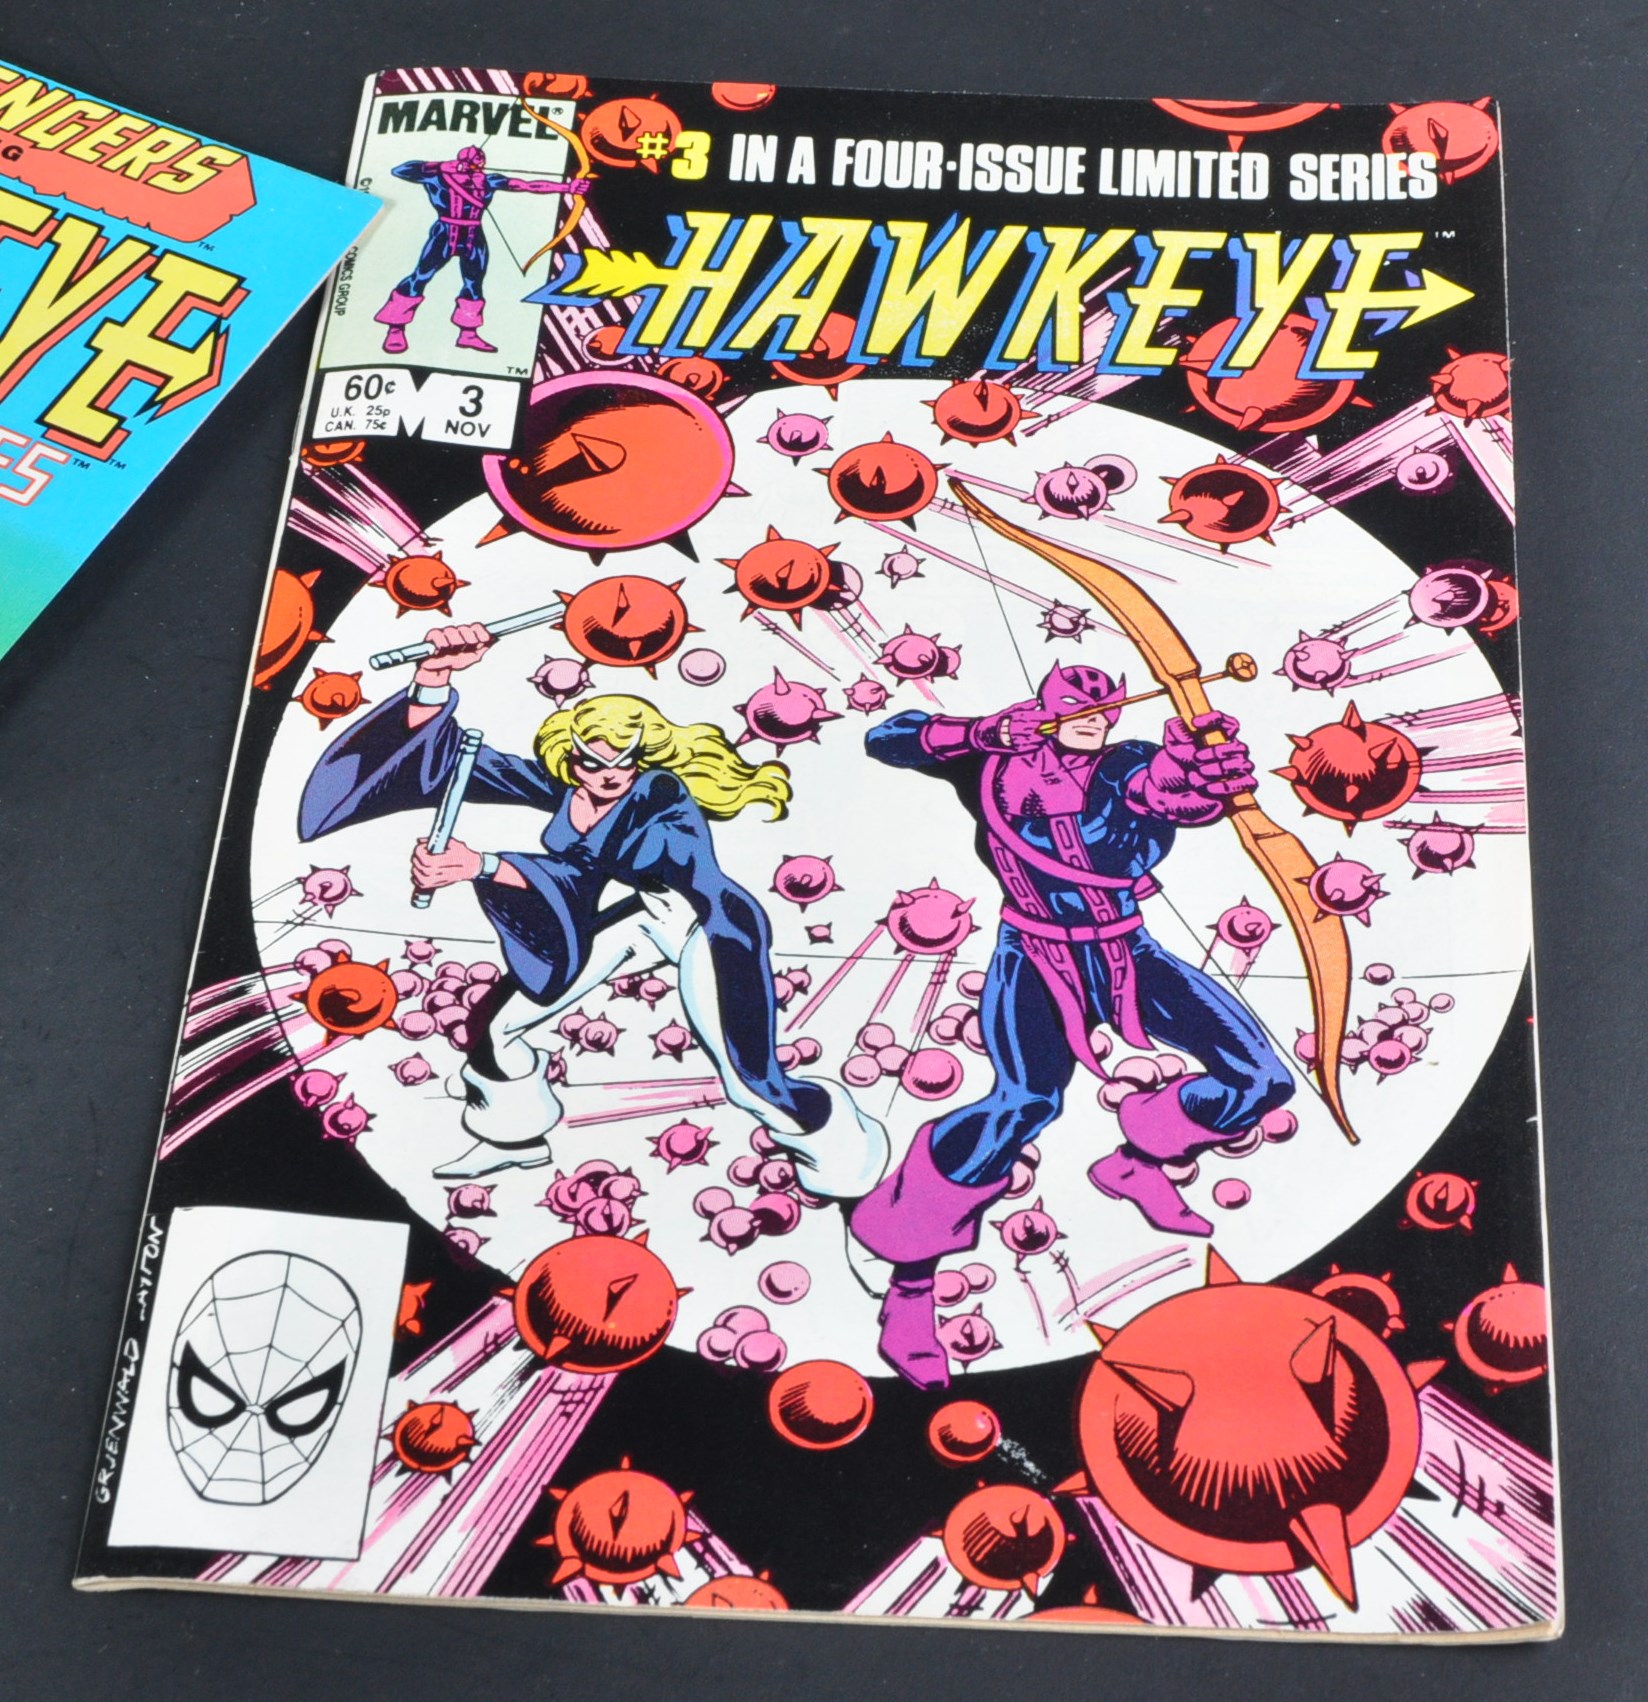 MARVEL COMICS - HAWKEYE - COLLECTION OF VINTAGE COMIC BOOKS - Image 2 of 9